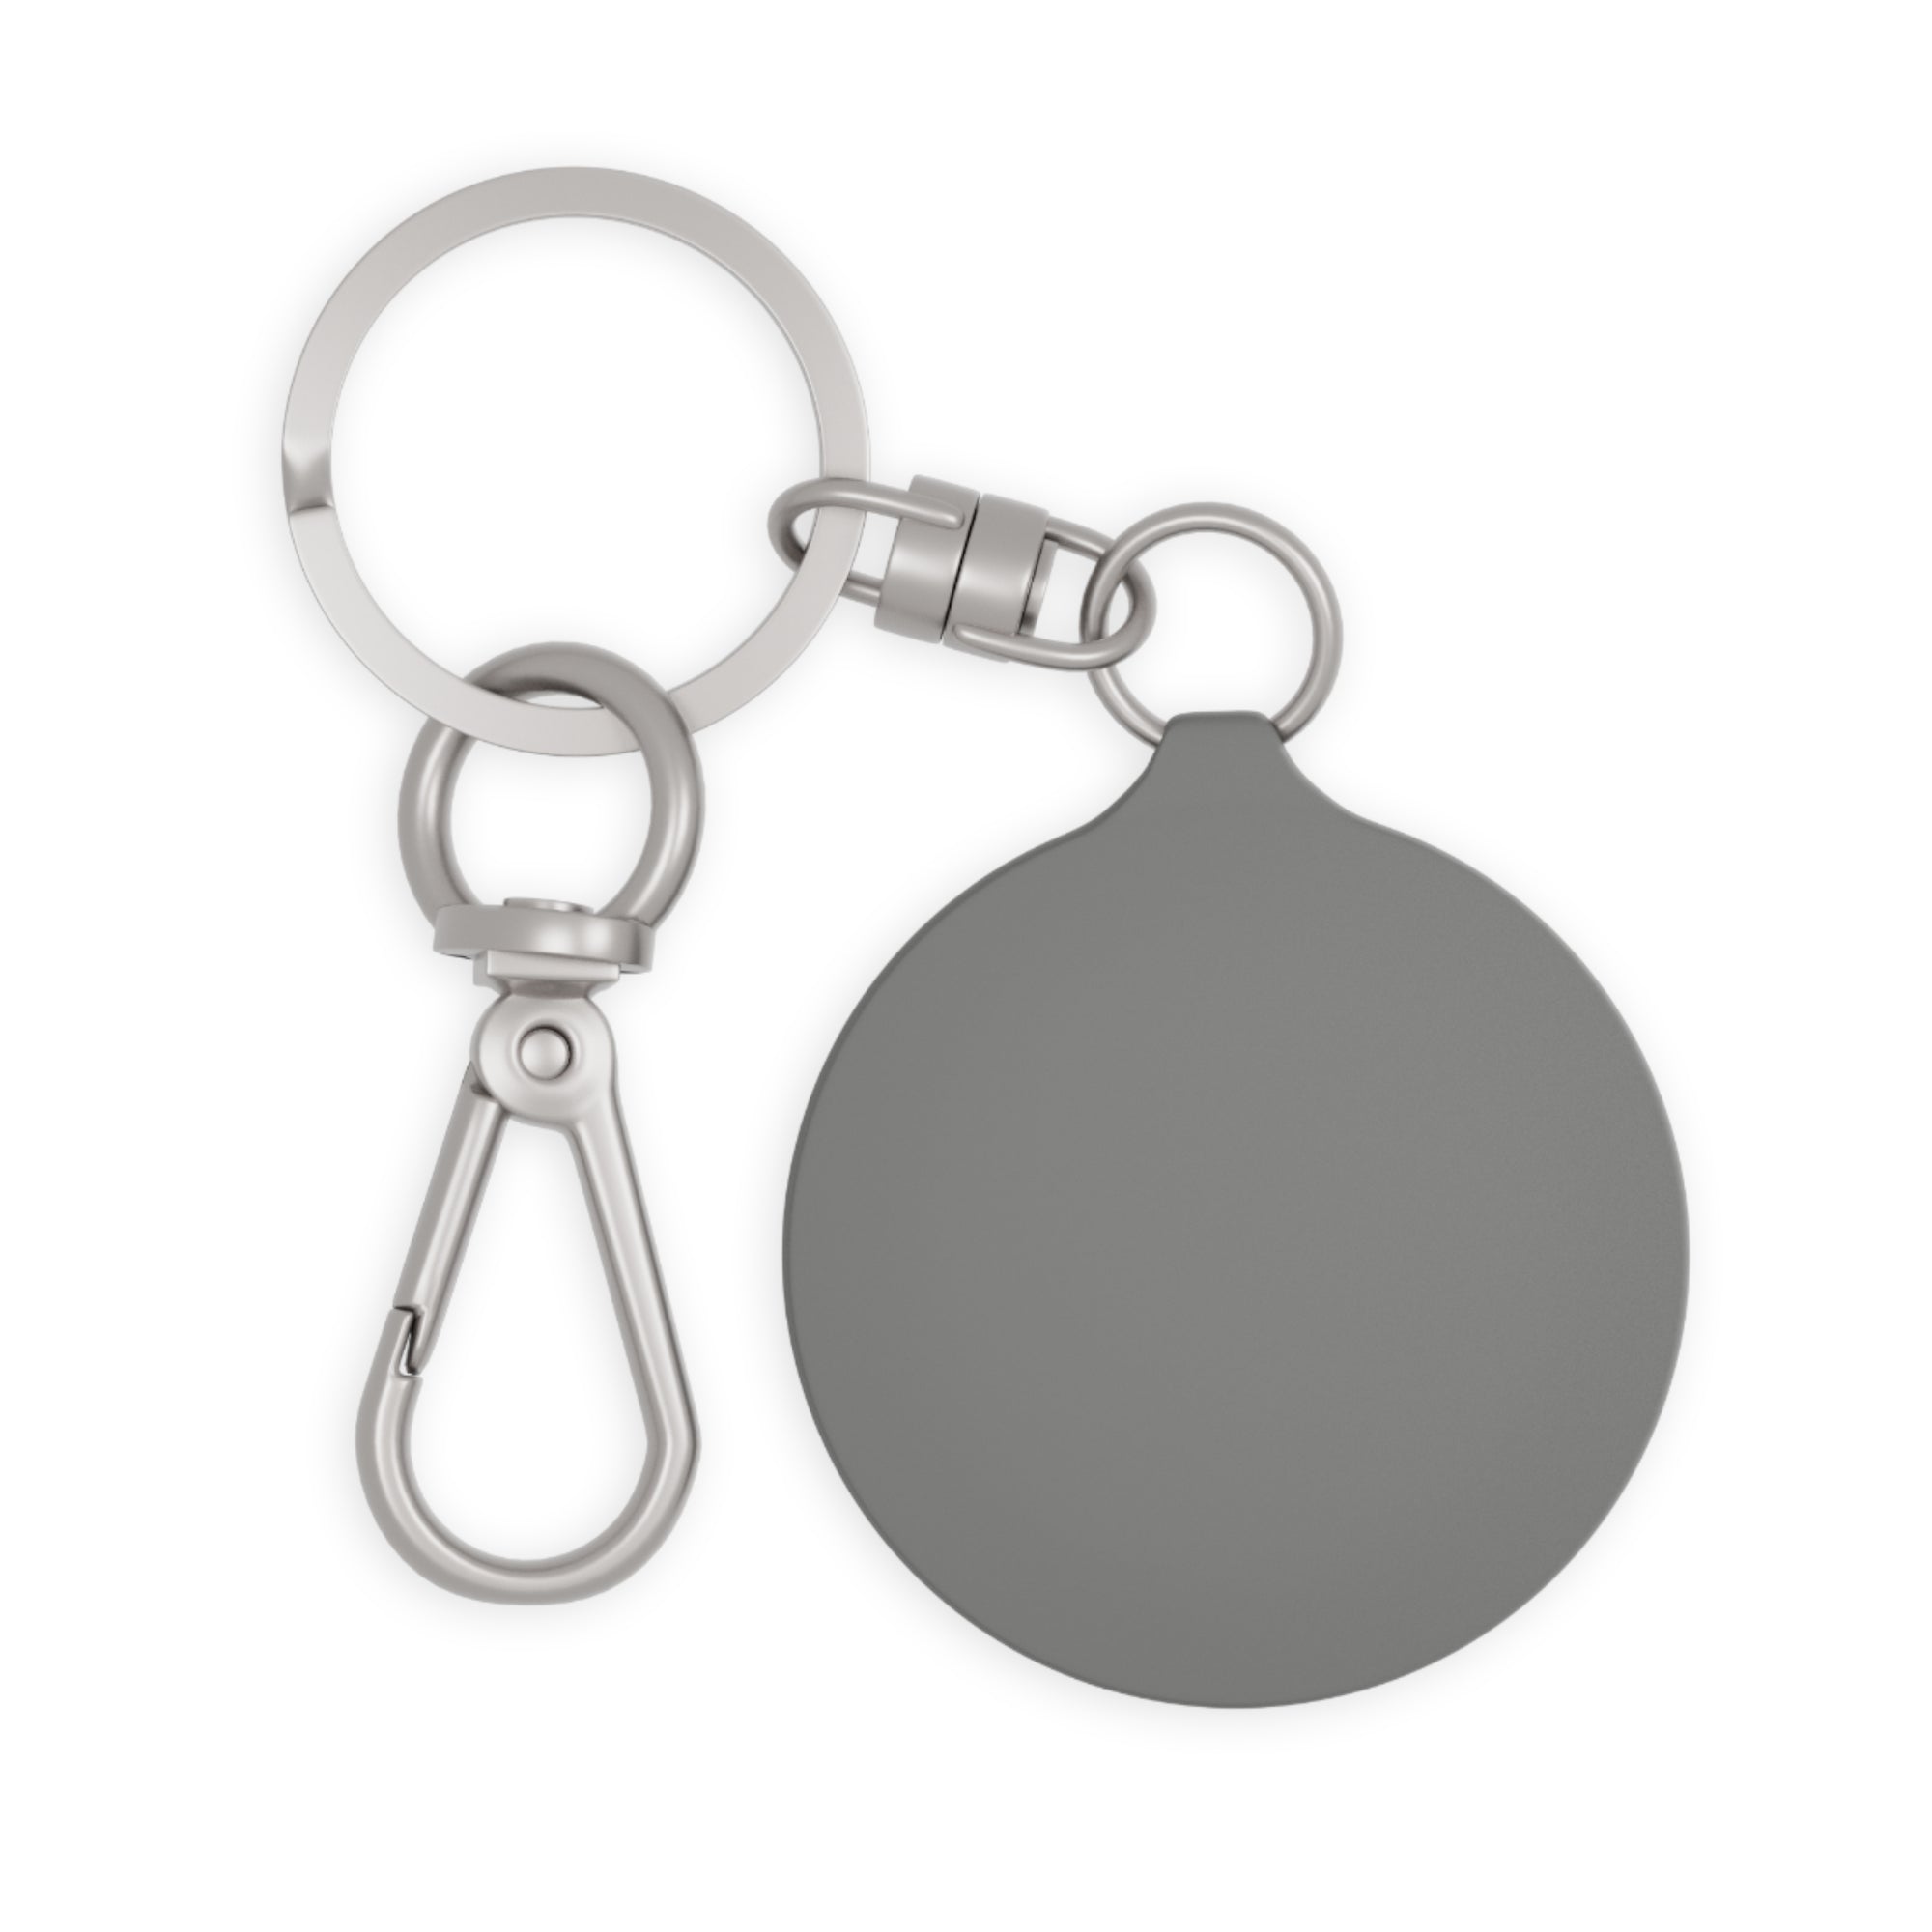 Harmony in Complexity Keyring Tag